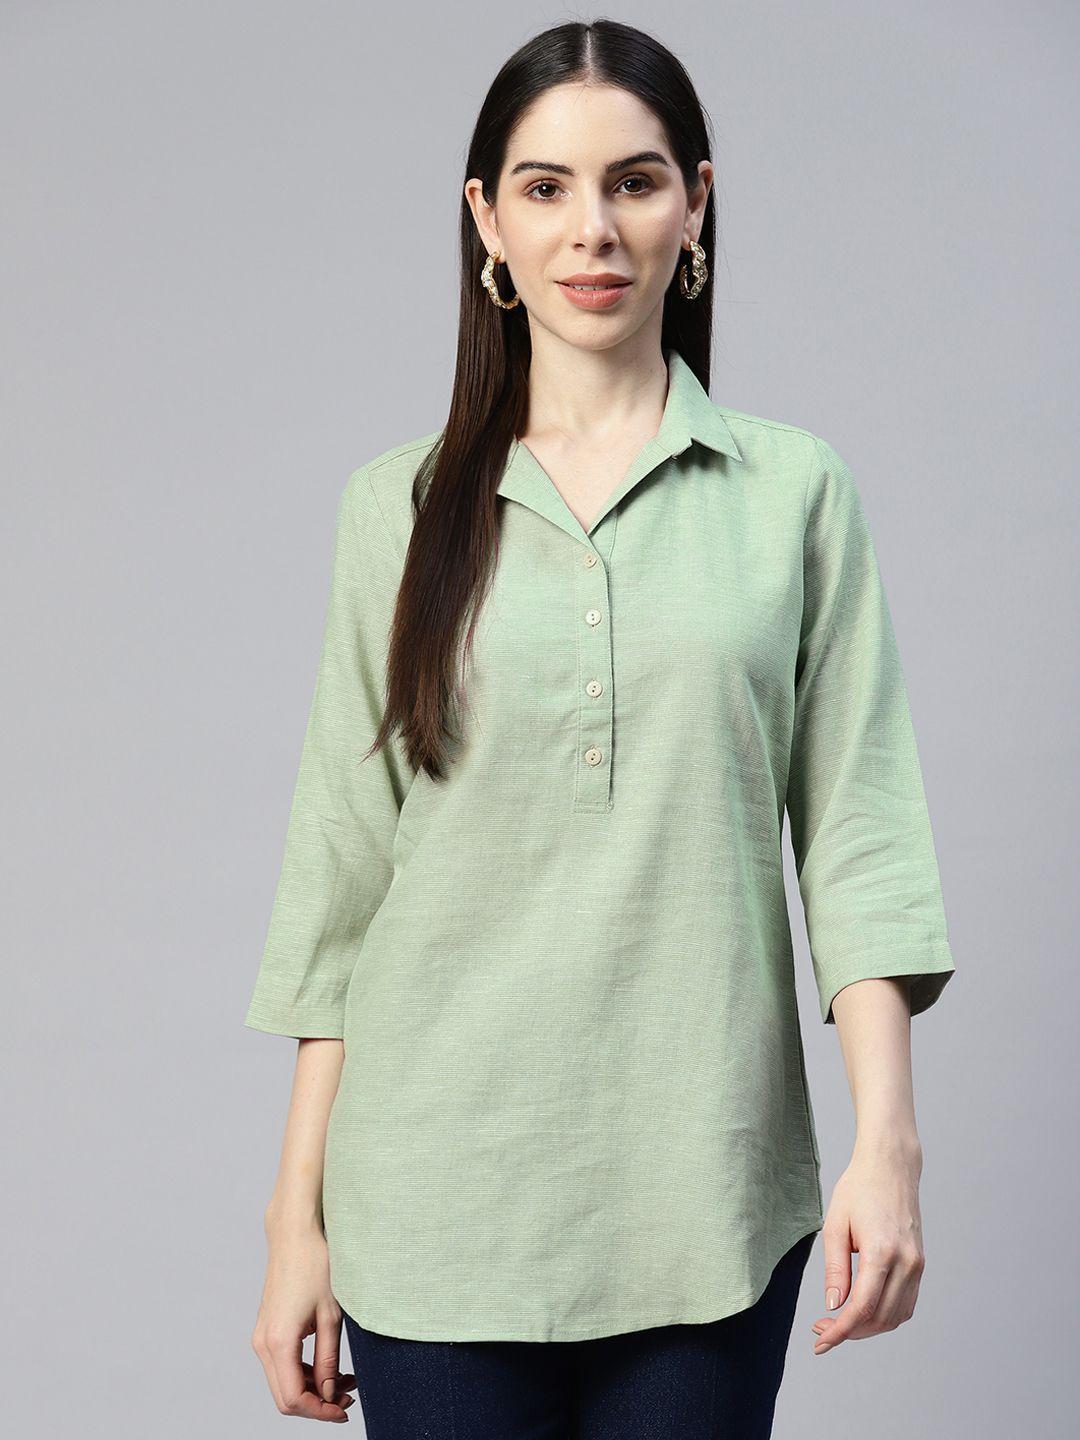 ayaany shirt style longline top